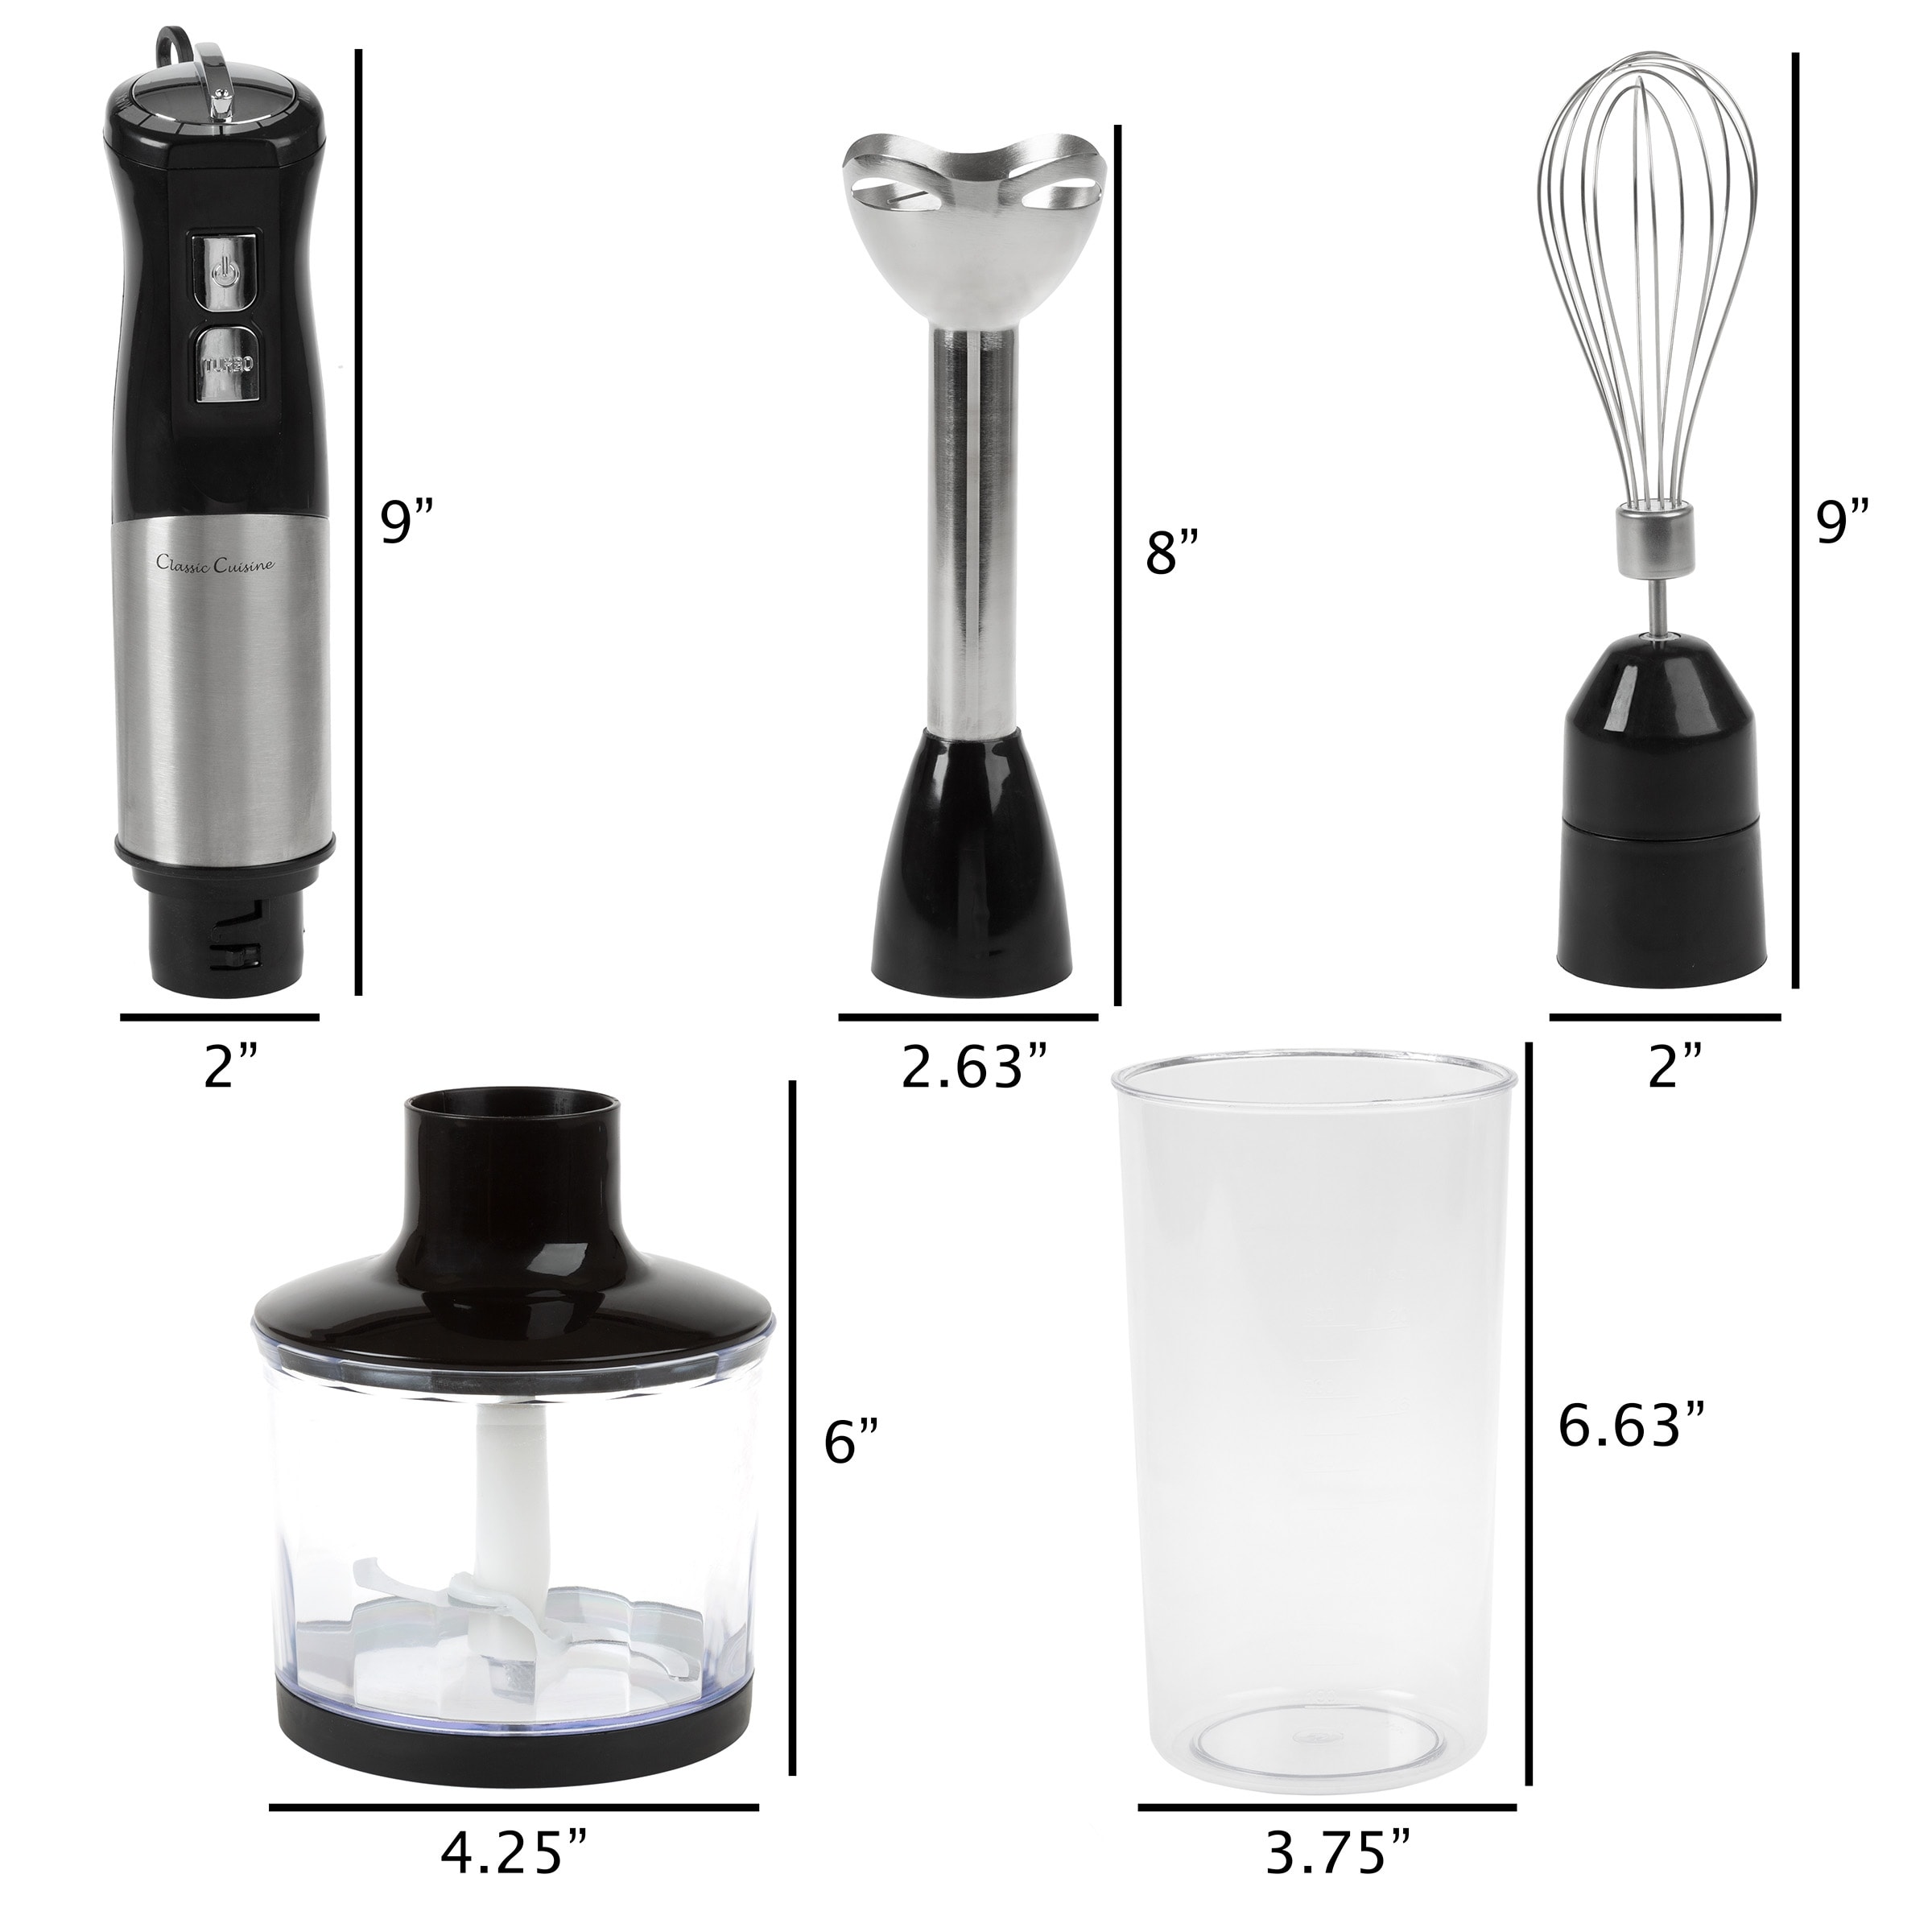 https://ak1.ostkcdn.com/images/products/is/images/direct/8a168623095532ee9d309d3381c3a0ec7568de4a/Immersion-Blender-4-in-1-6-Speed-Hand-Mixer-Set-by-Classic-Cuisine.jpg